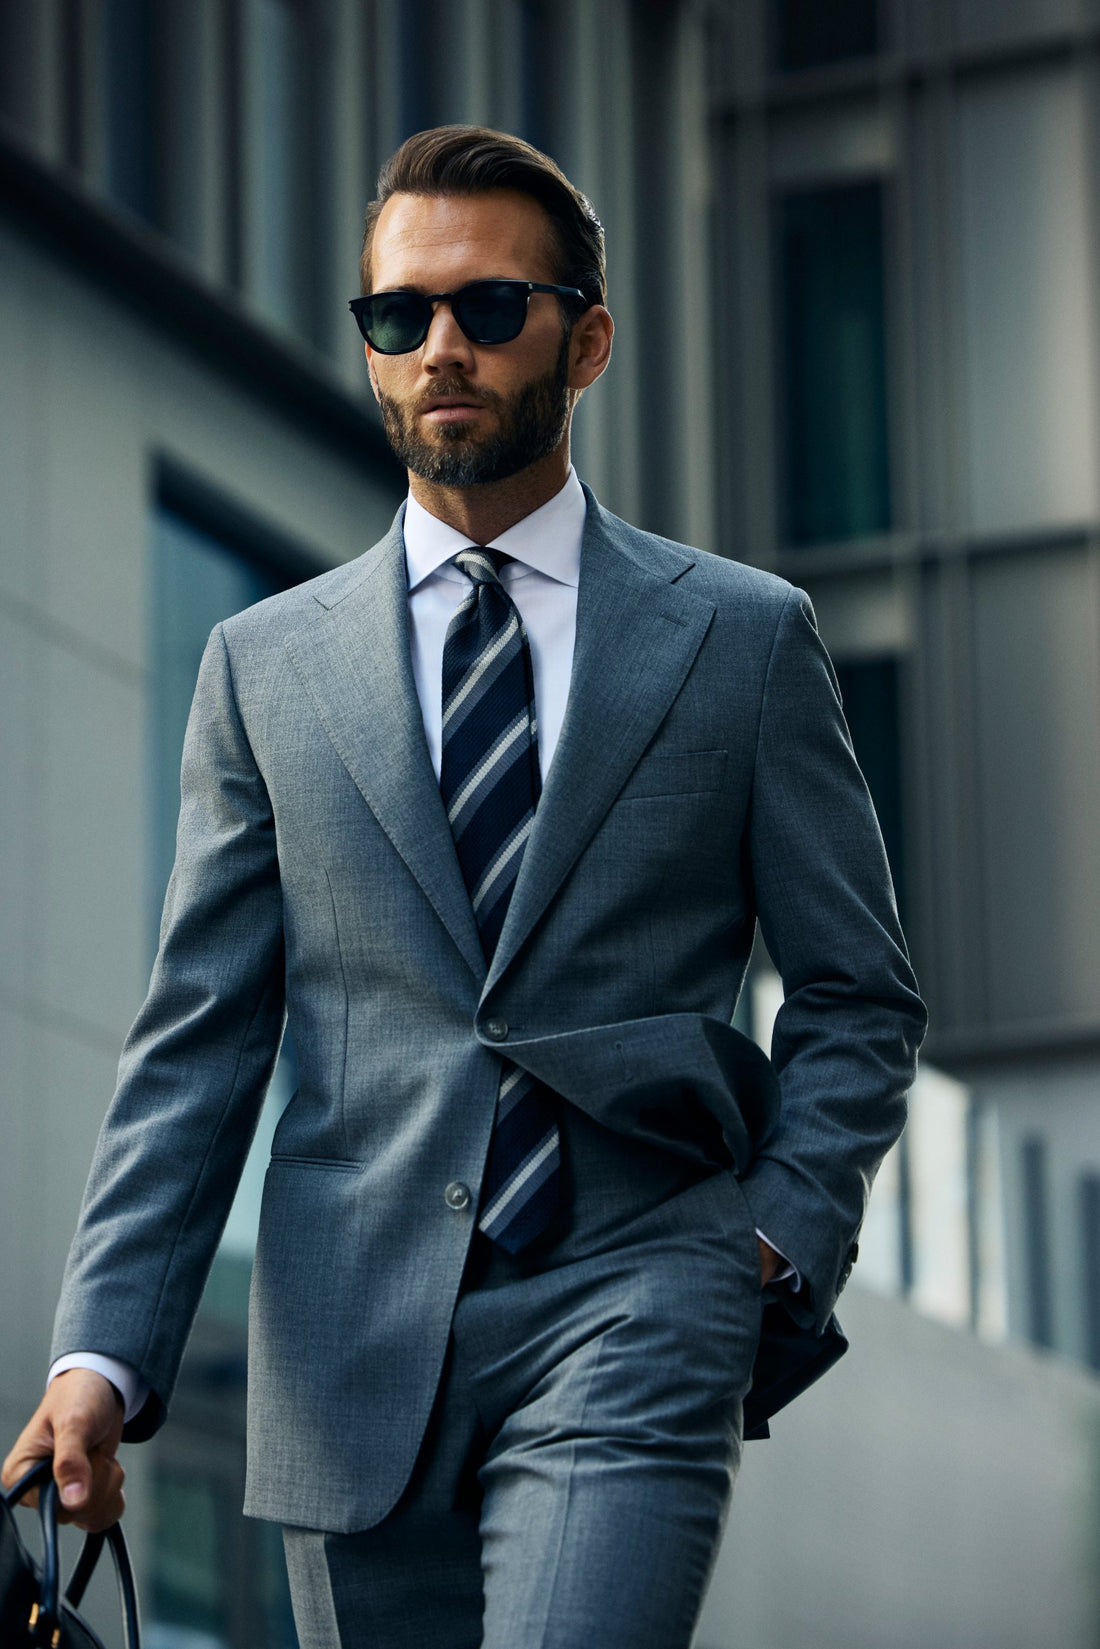 How to dress for the office